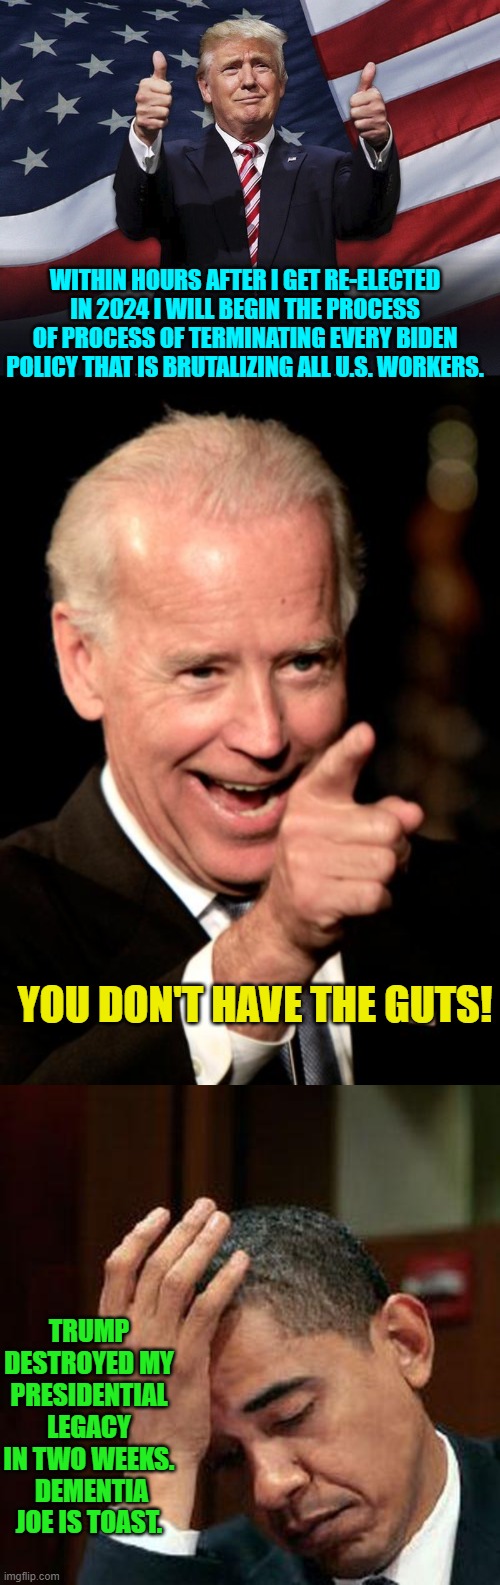 Yep . . . deja vu. | WITHIN HOURS AFTER I GET RE-ELECTED IN 2024 I WILL BEGIN THE PROCESS OF PROCESS OF TERMINATING EVERY BIDEN POLICY THAT IS BRUTALIZING ALL U.S. WORKERS. YOU DON'T HAVE THE GUTS! TRUMP DESTROYED MY PRESIDENTIAL LEGACY IN TWO WEEKS.  DEMENTIA JOE IS TOAST. | image tagged in donald trump thumbs up | made w/ Imgflip meme maker